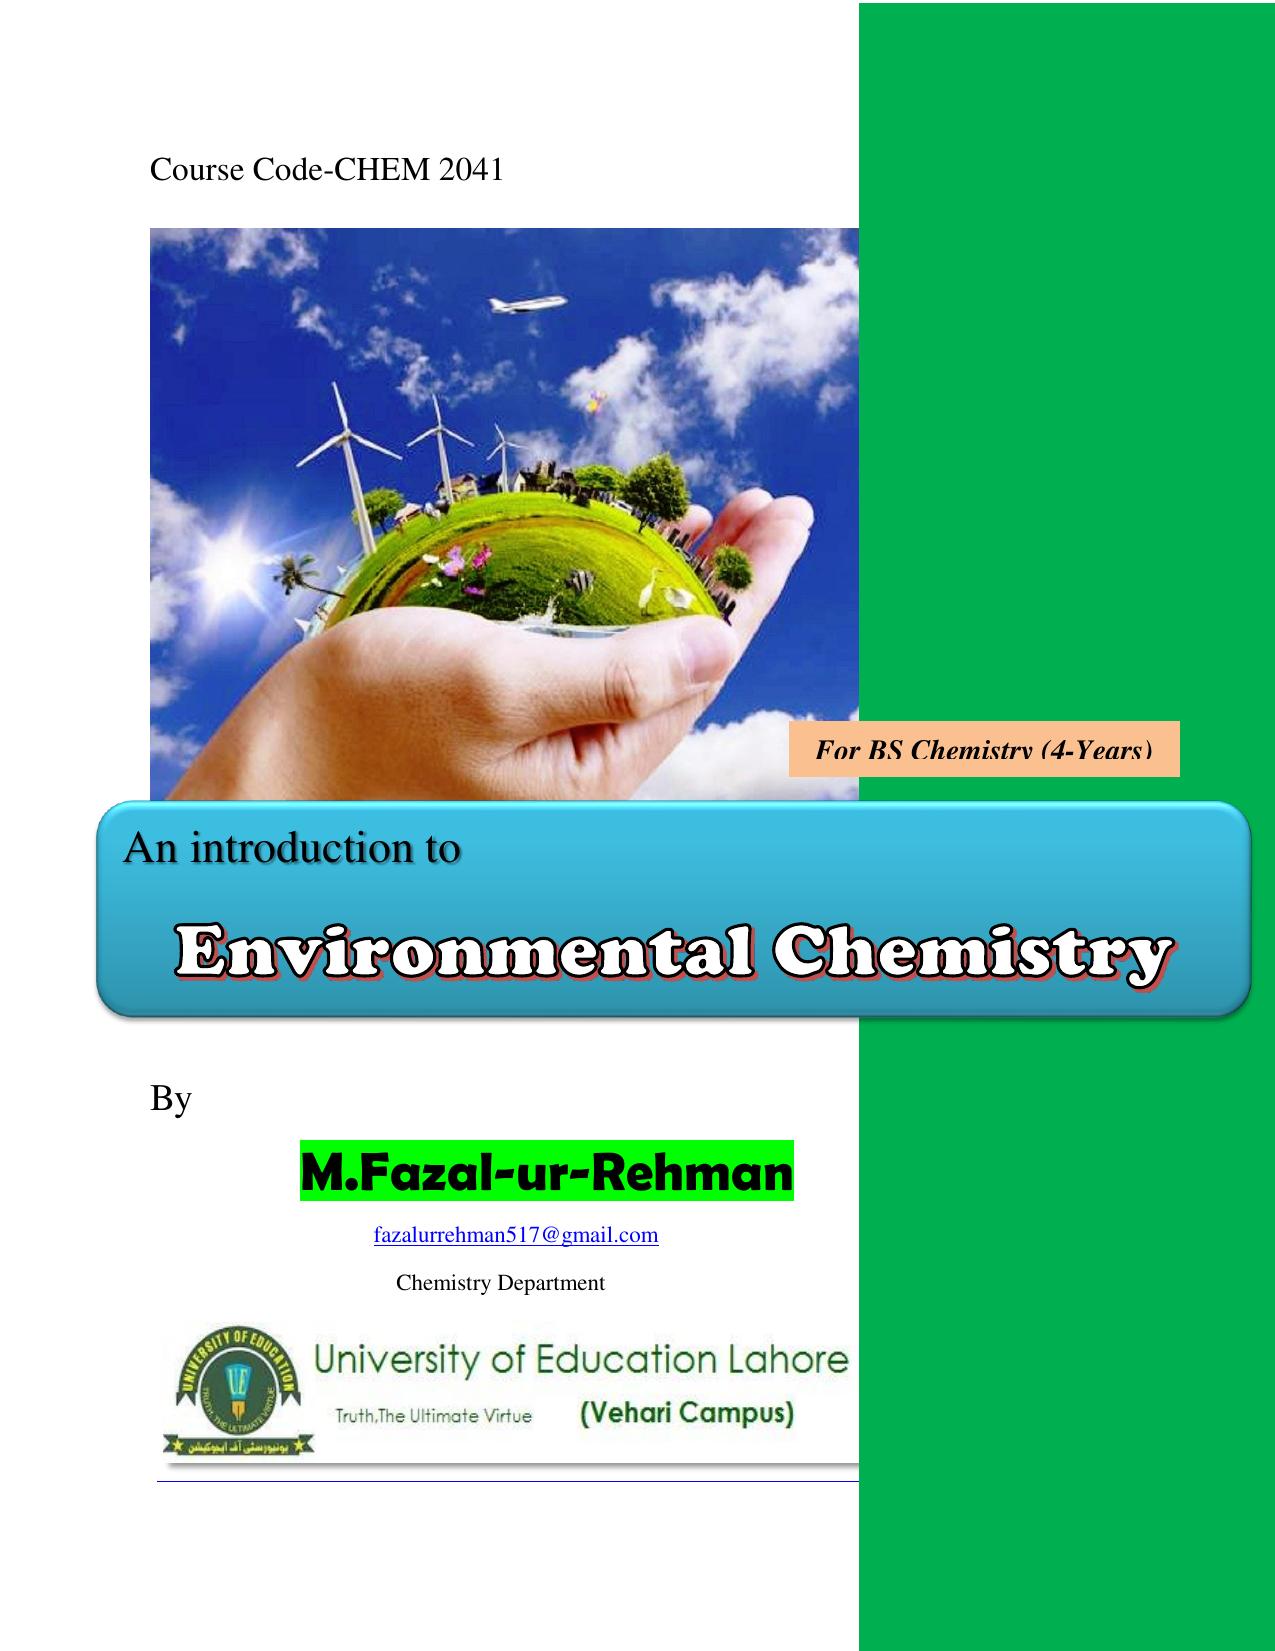 Basic Introduction to Environmental Chemistry